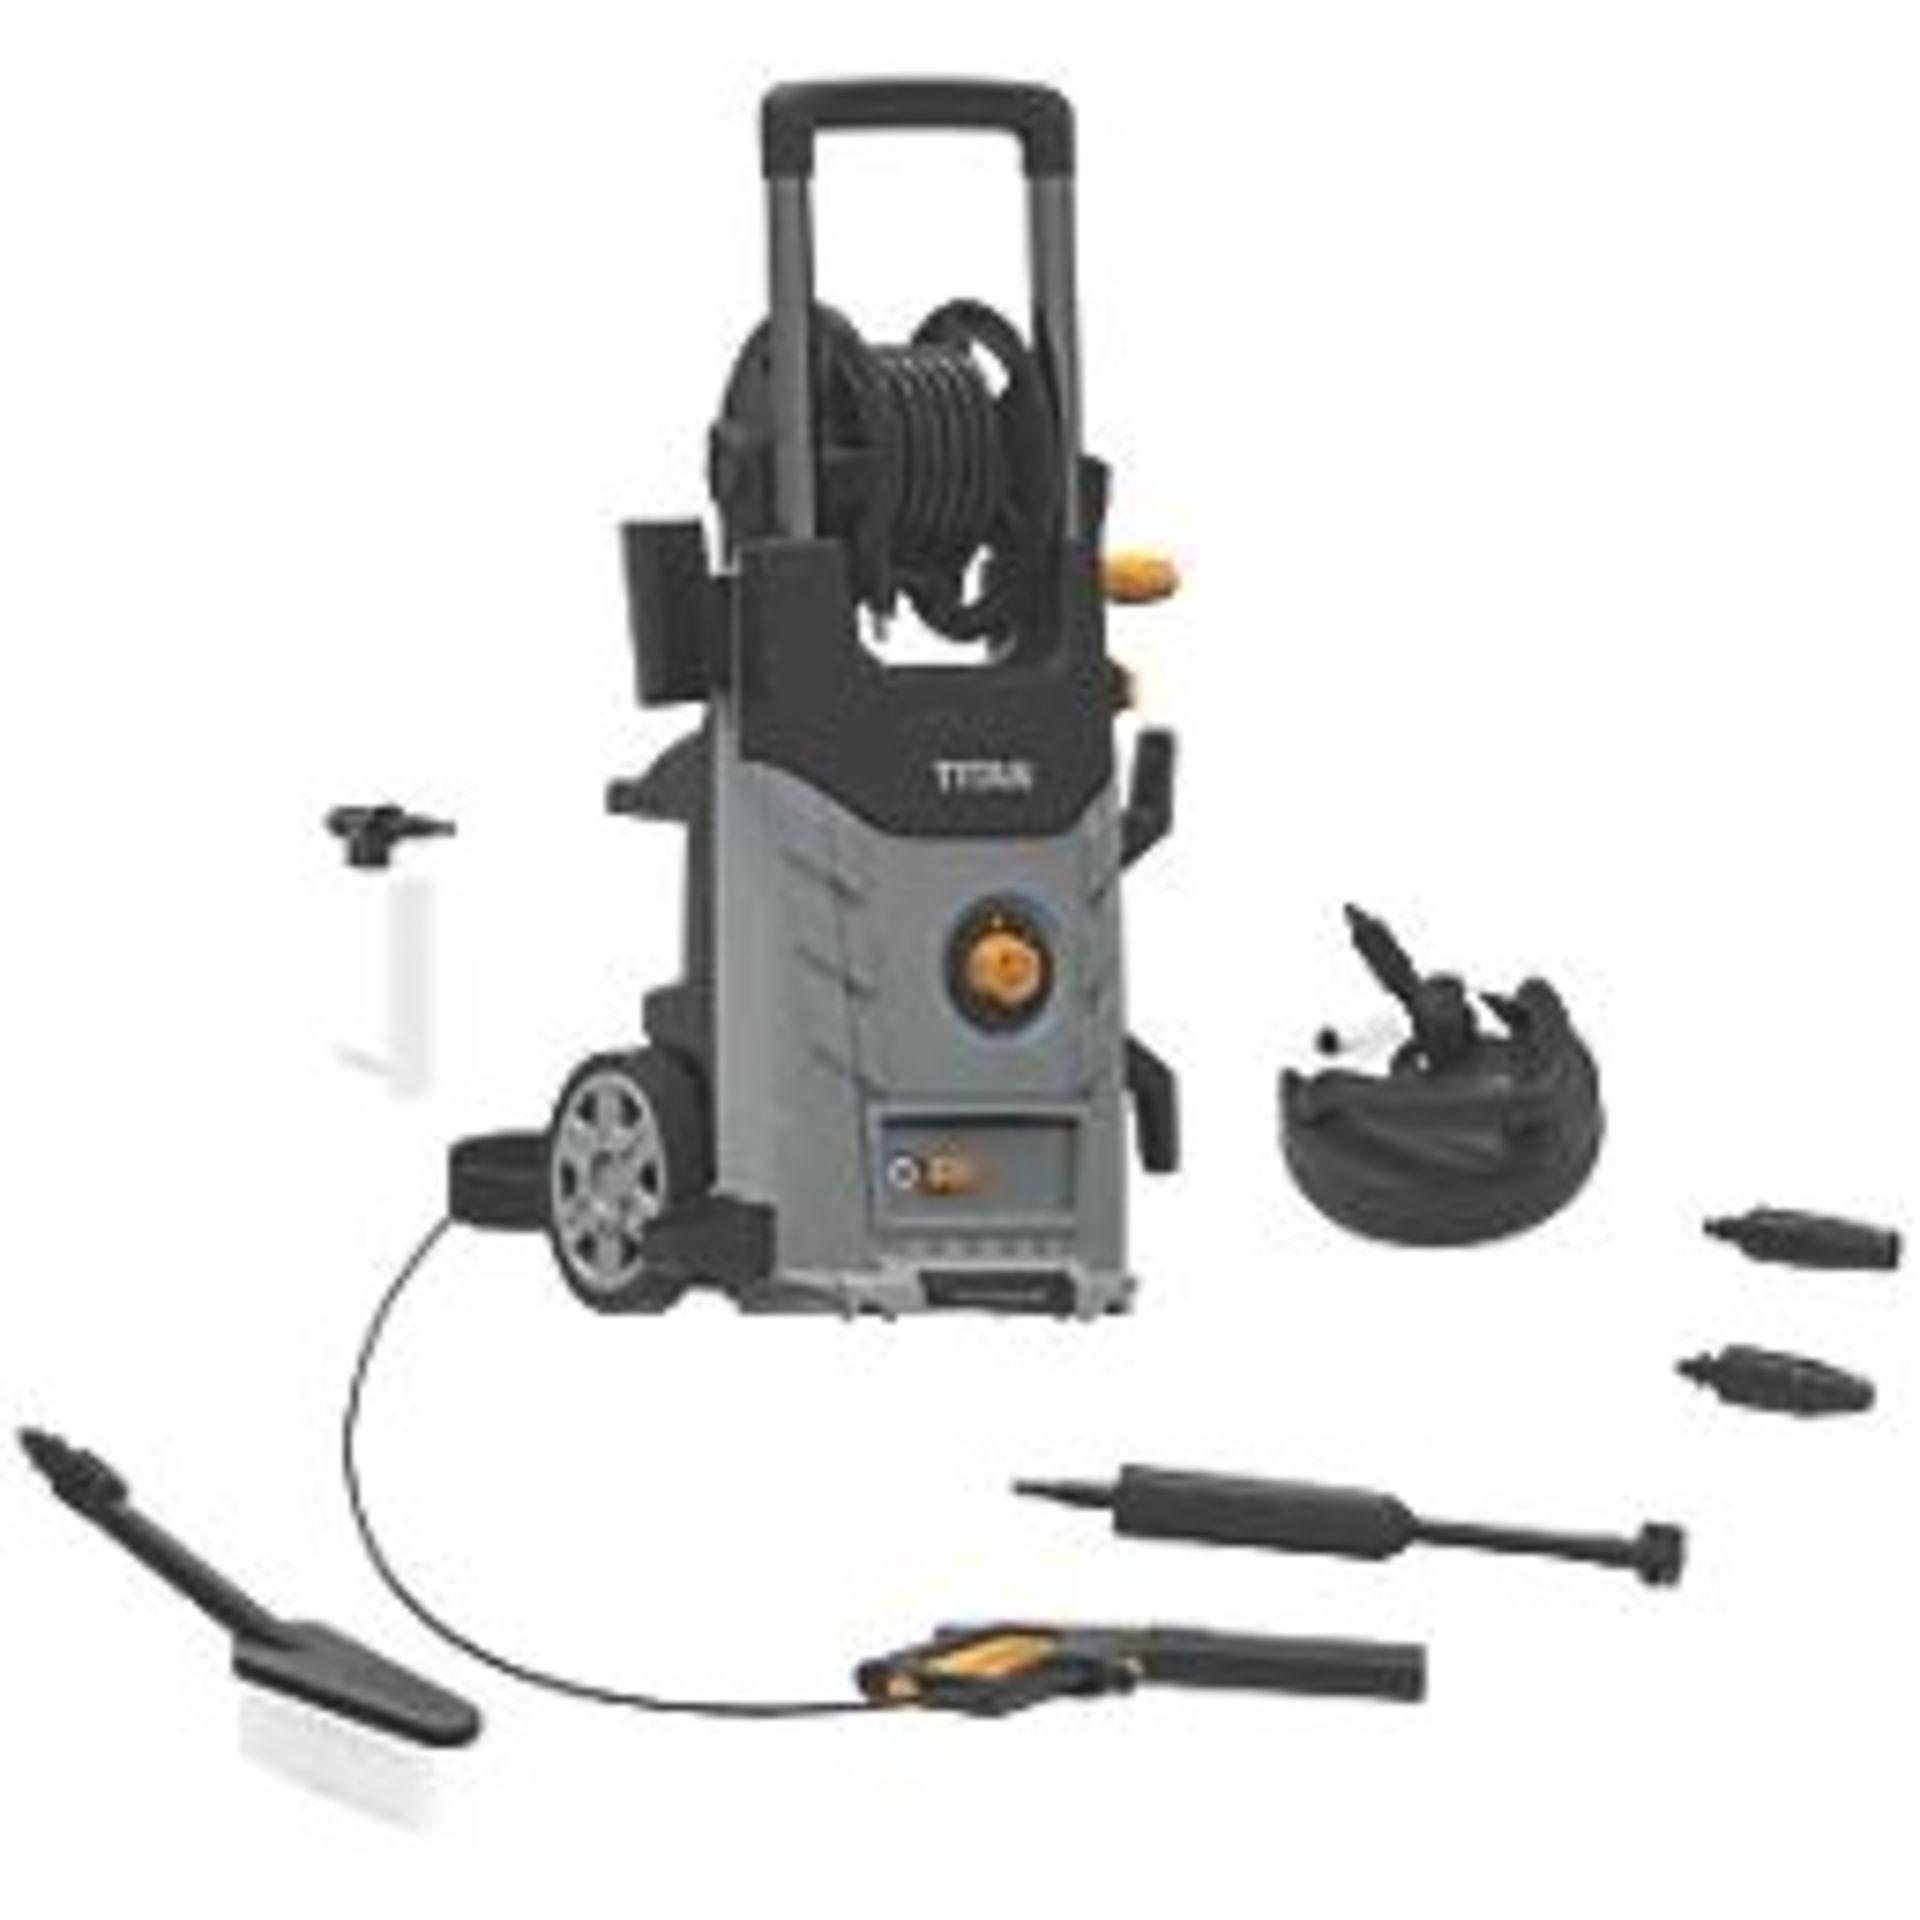 TITAN TTB2200PRW 150BAR ELECTRIC HIGH PRESSURE WASHER 2.2KW 230V. - P5. Compact design with space-